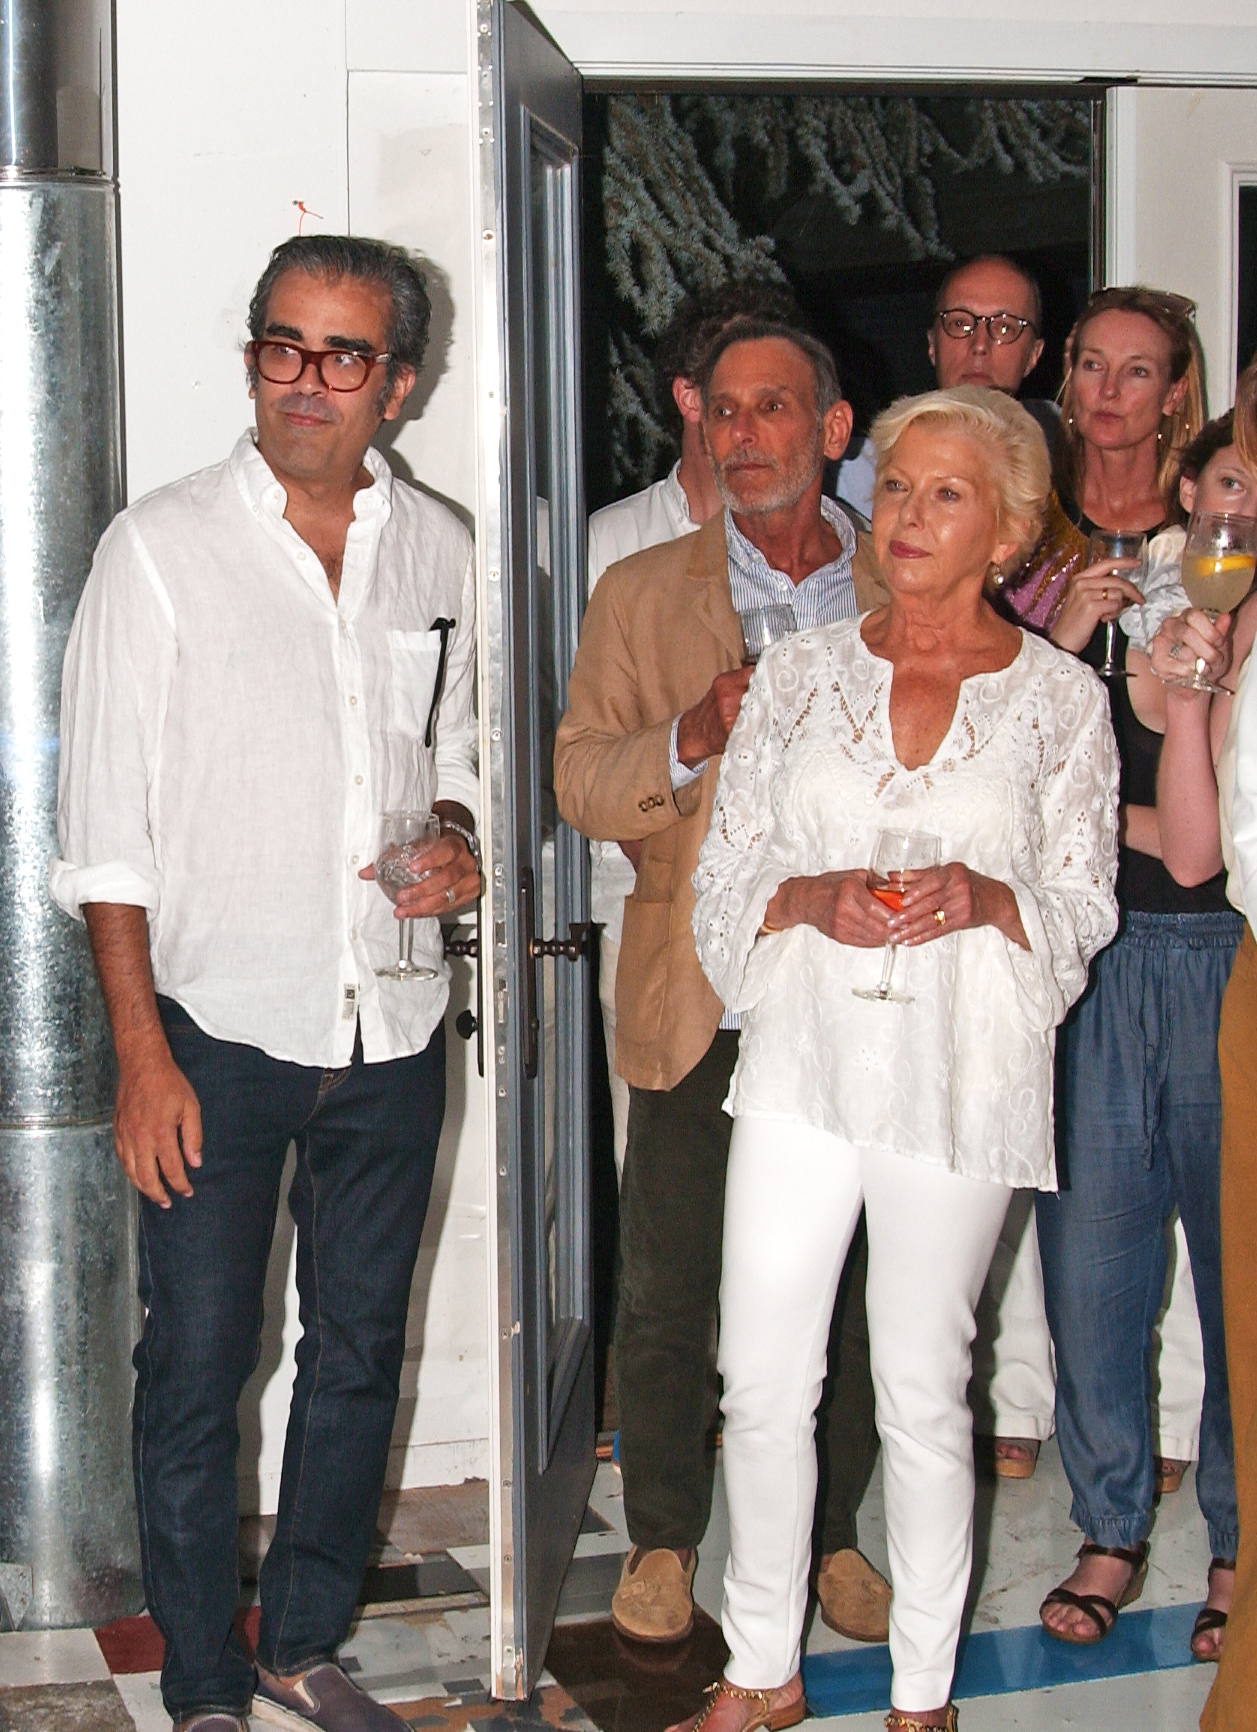 Artist Enoc Perez and David Salle in center of doorway among guests attend an event in celebration of Eric's forthcoming exhibition at the Dallas Contemporary at the former home and studio of artist Elaine de Kooing, East Hampton, NY.